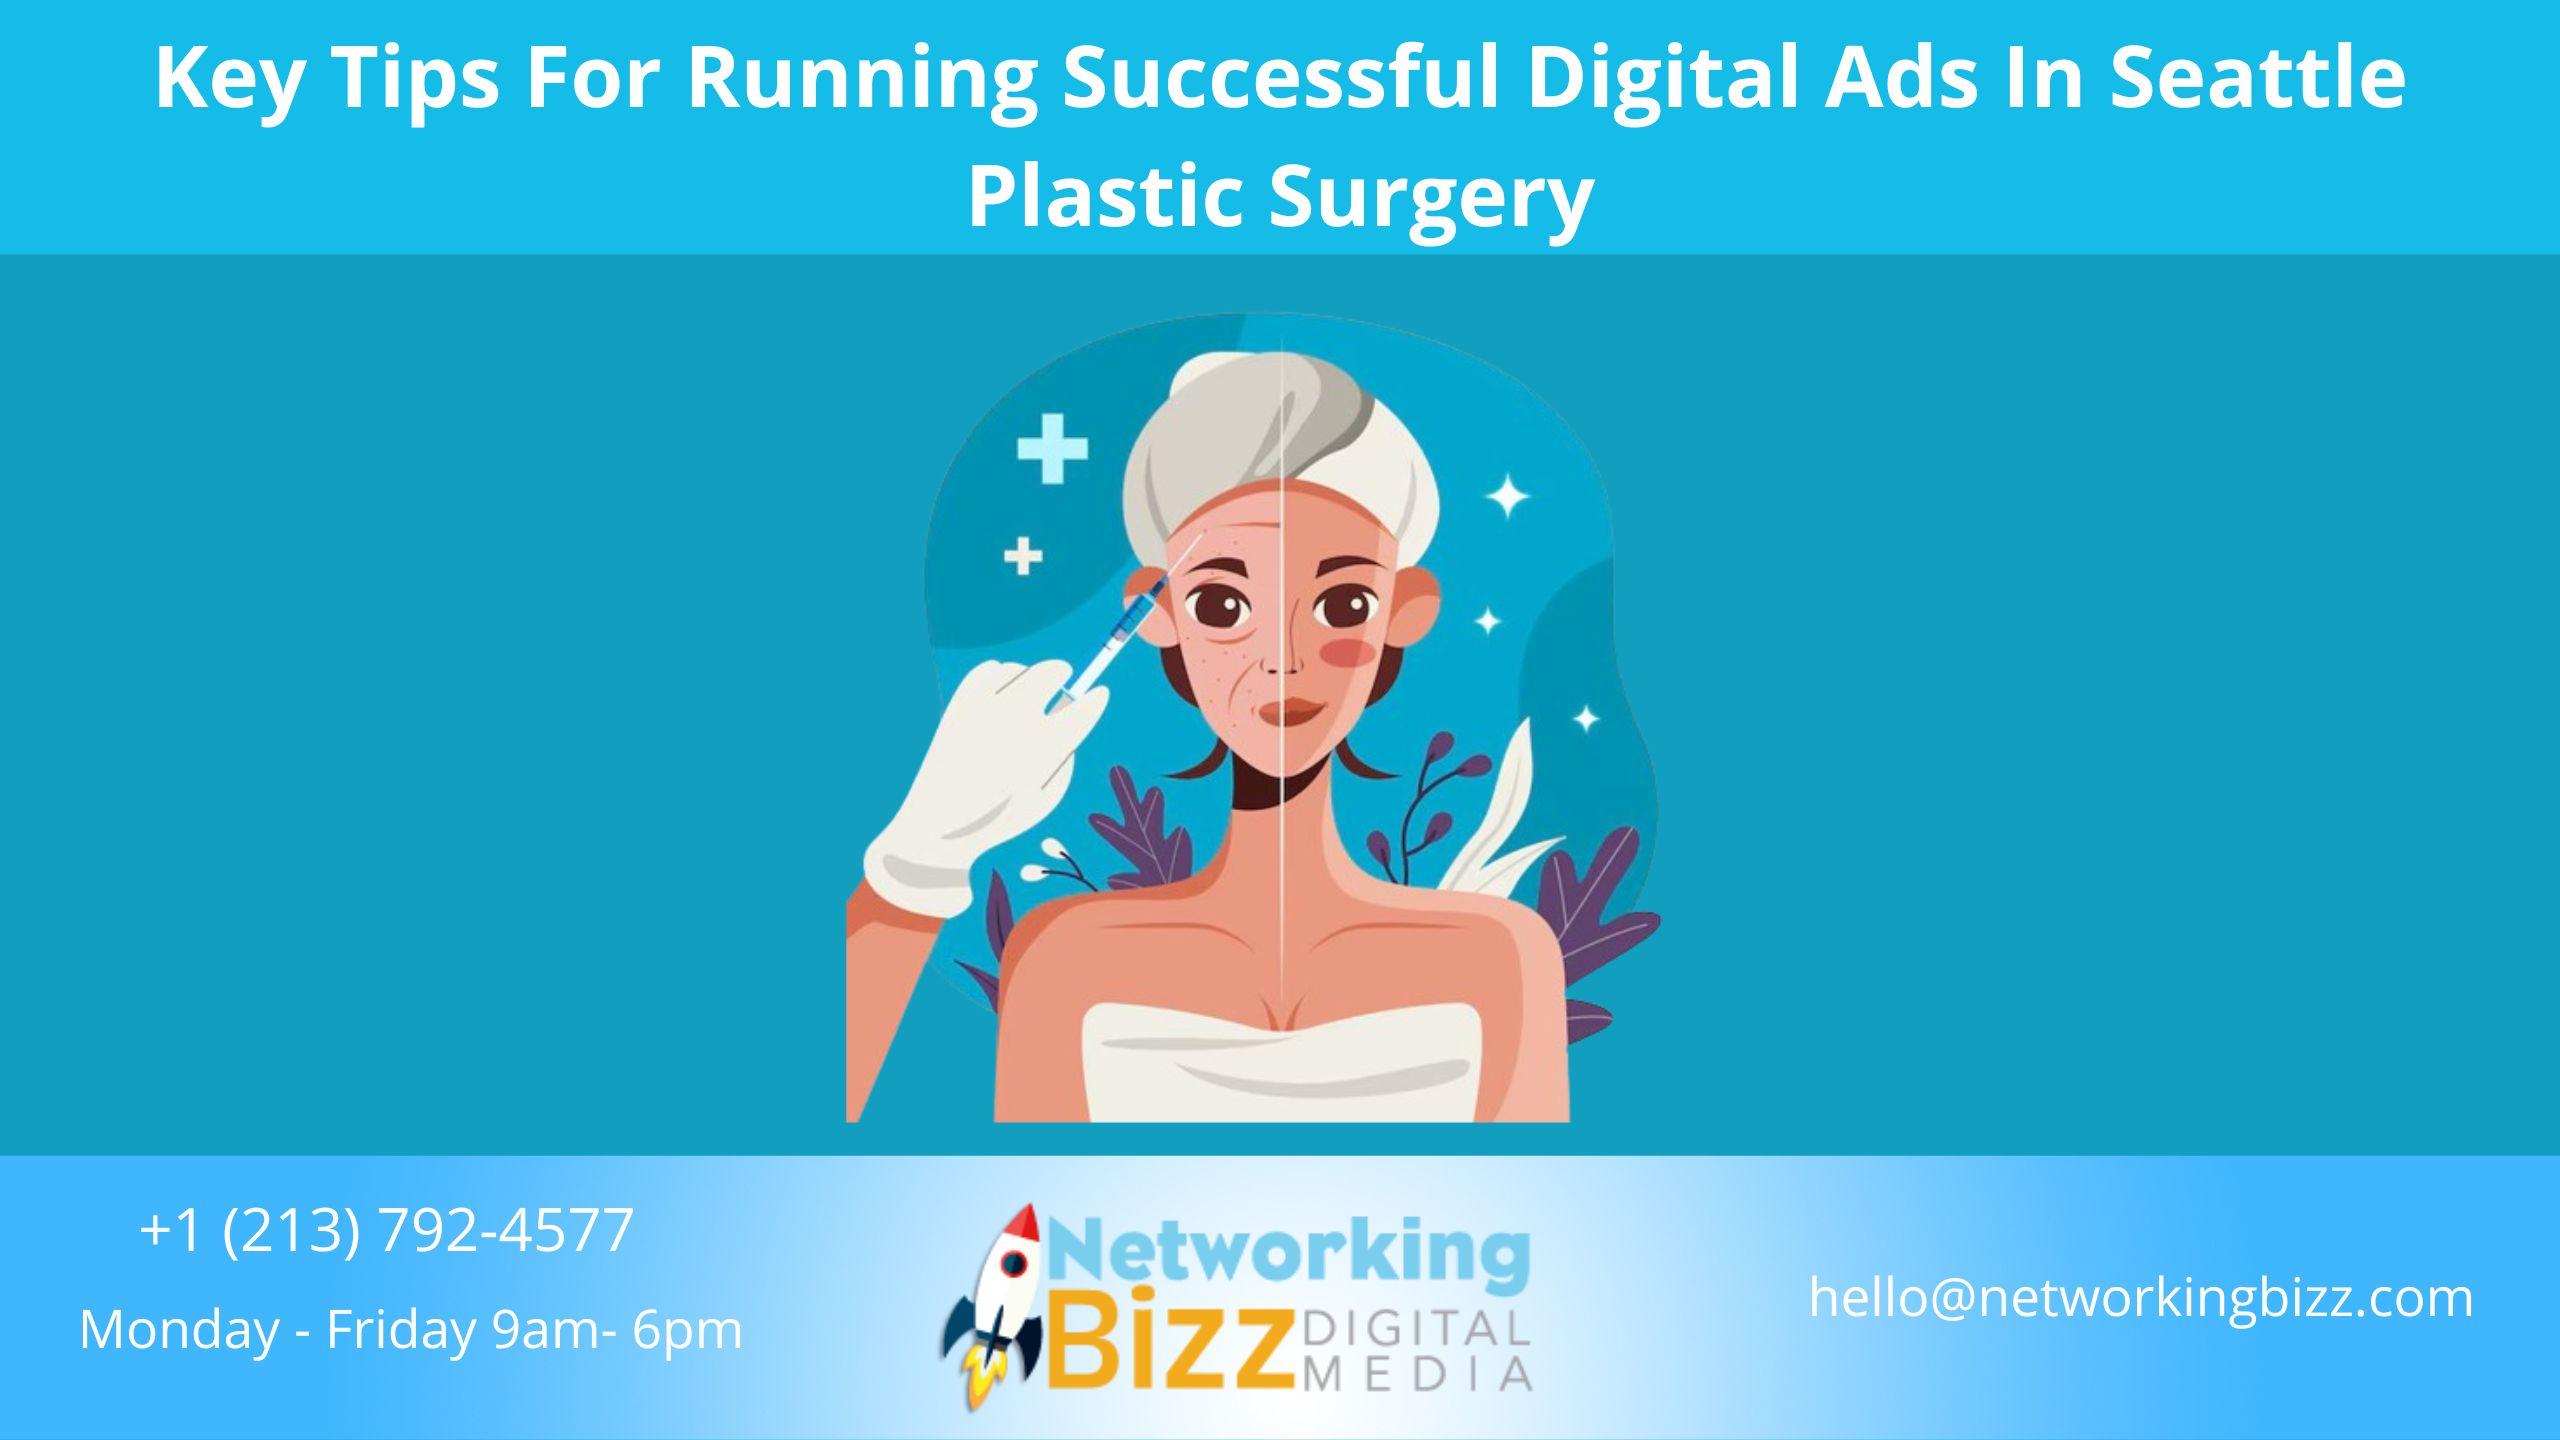 Key Tips For Running Successful Digital Ads In Seattle Plastic Surgery